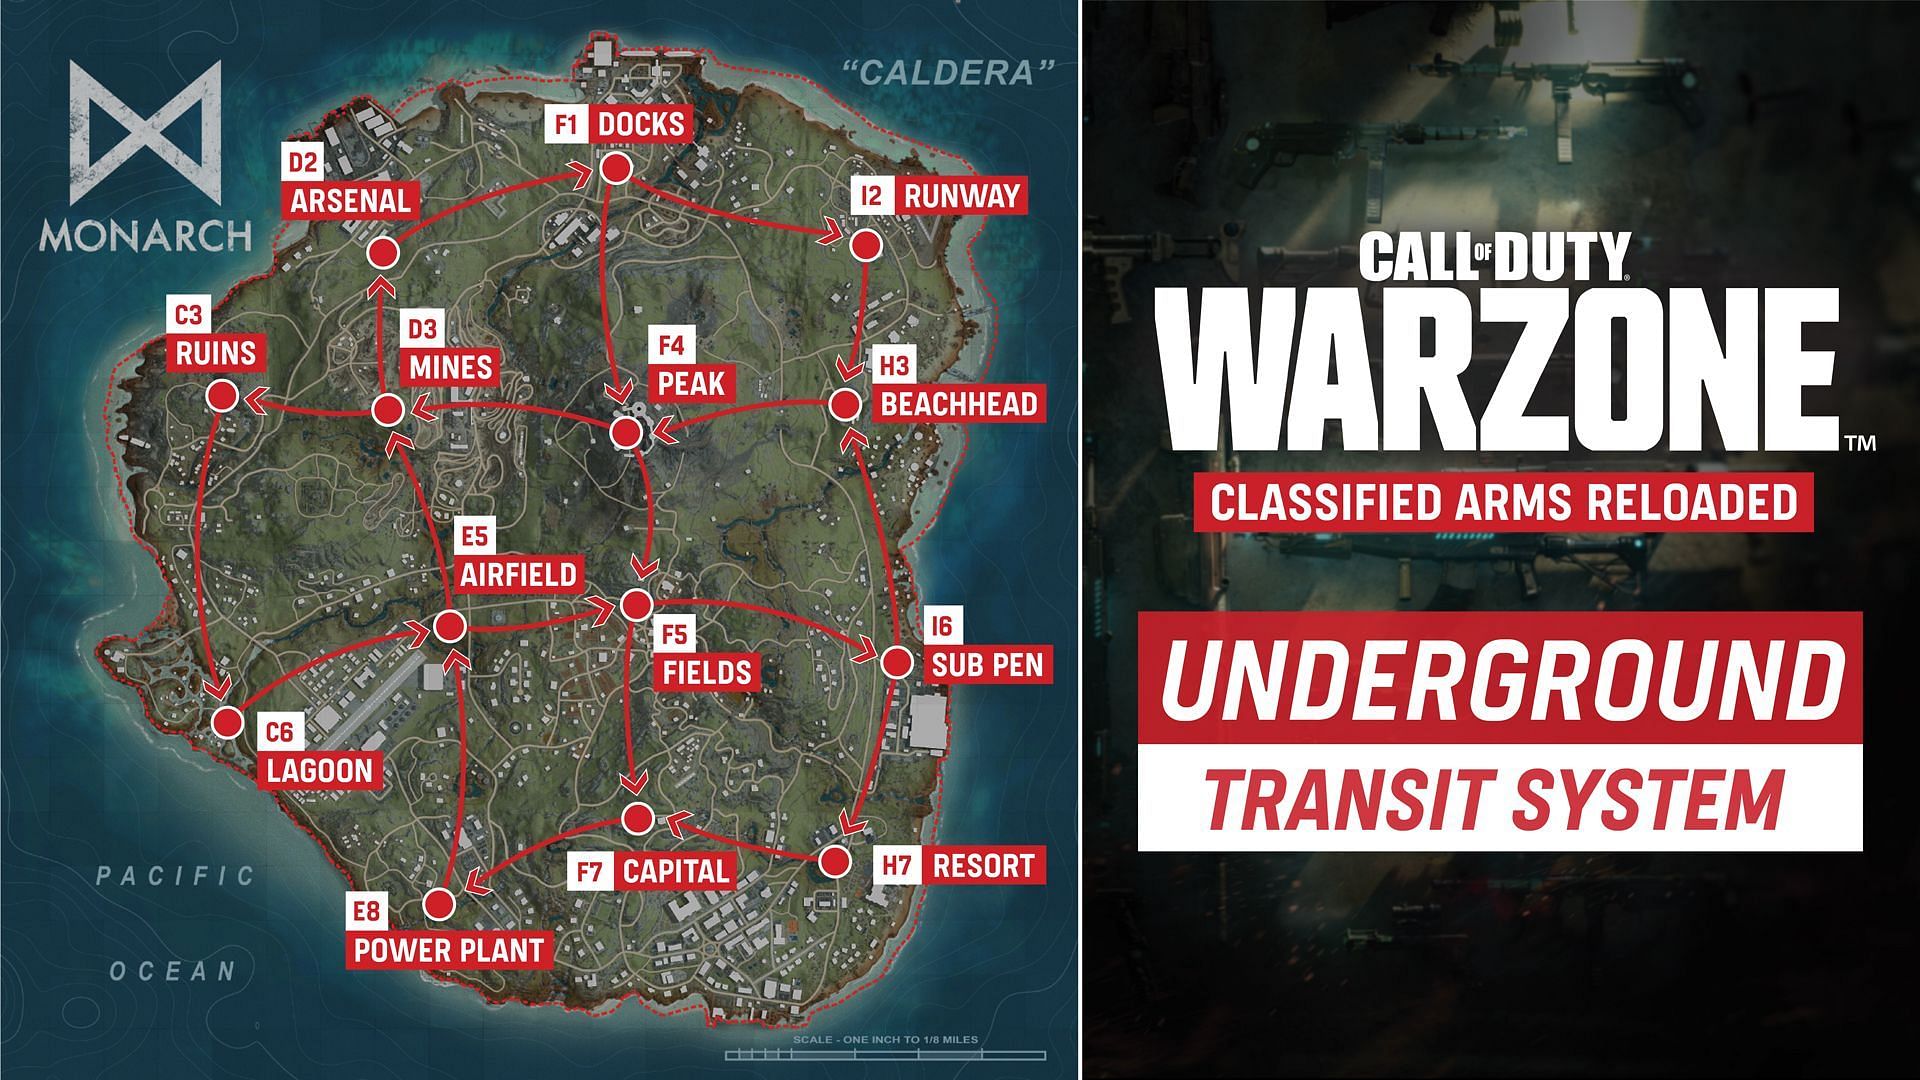 Minecarts were added Call of Duty Vanguard and Warzone Season 3 Classified Arms Reloaded (Image by Activision)